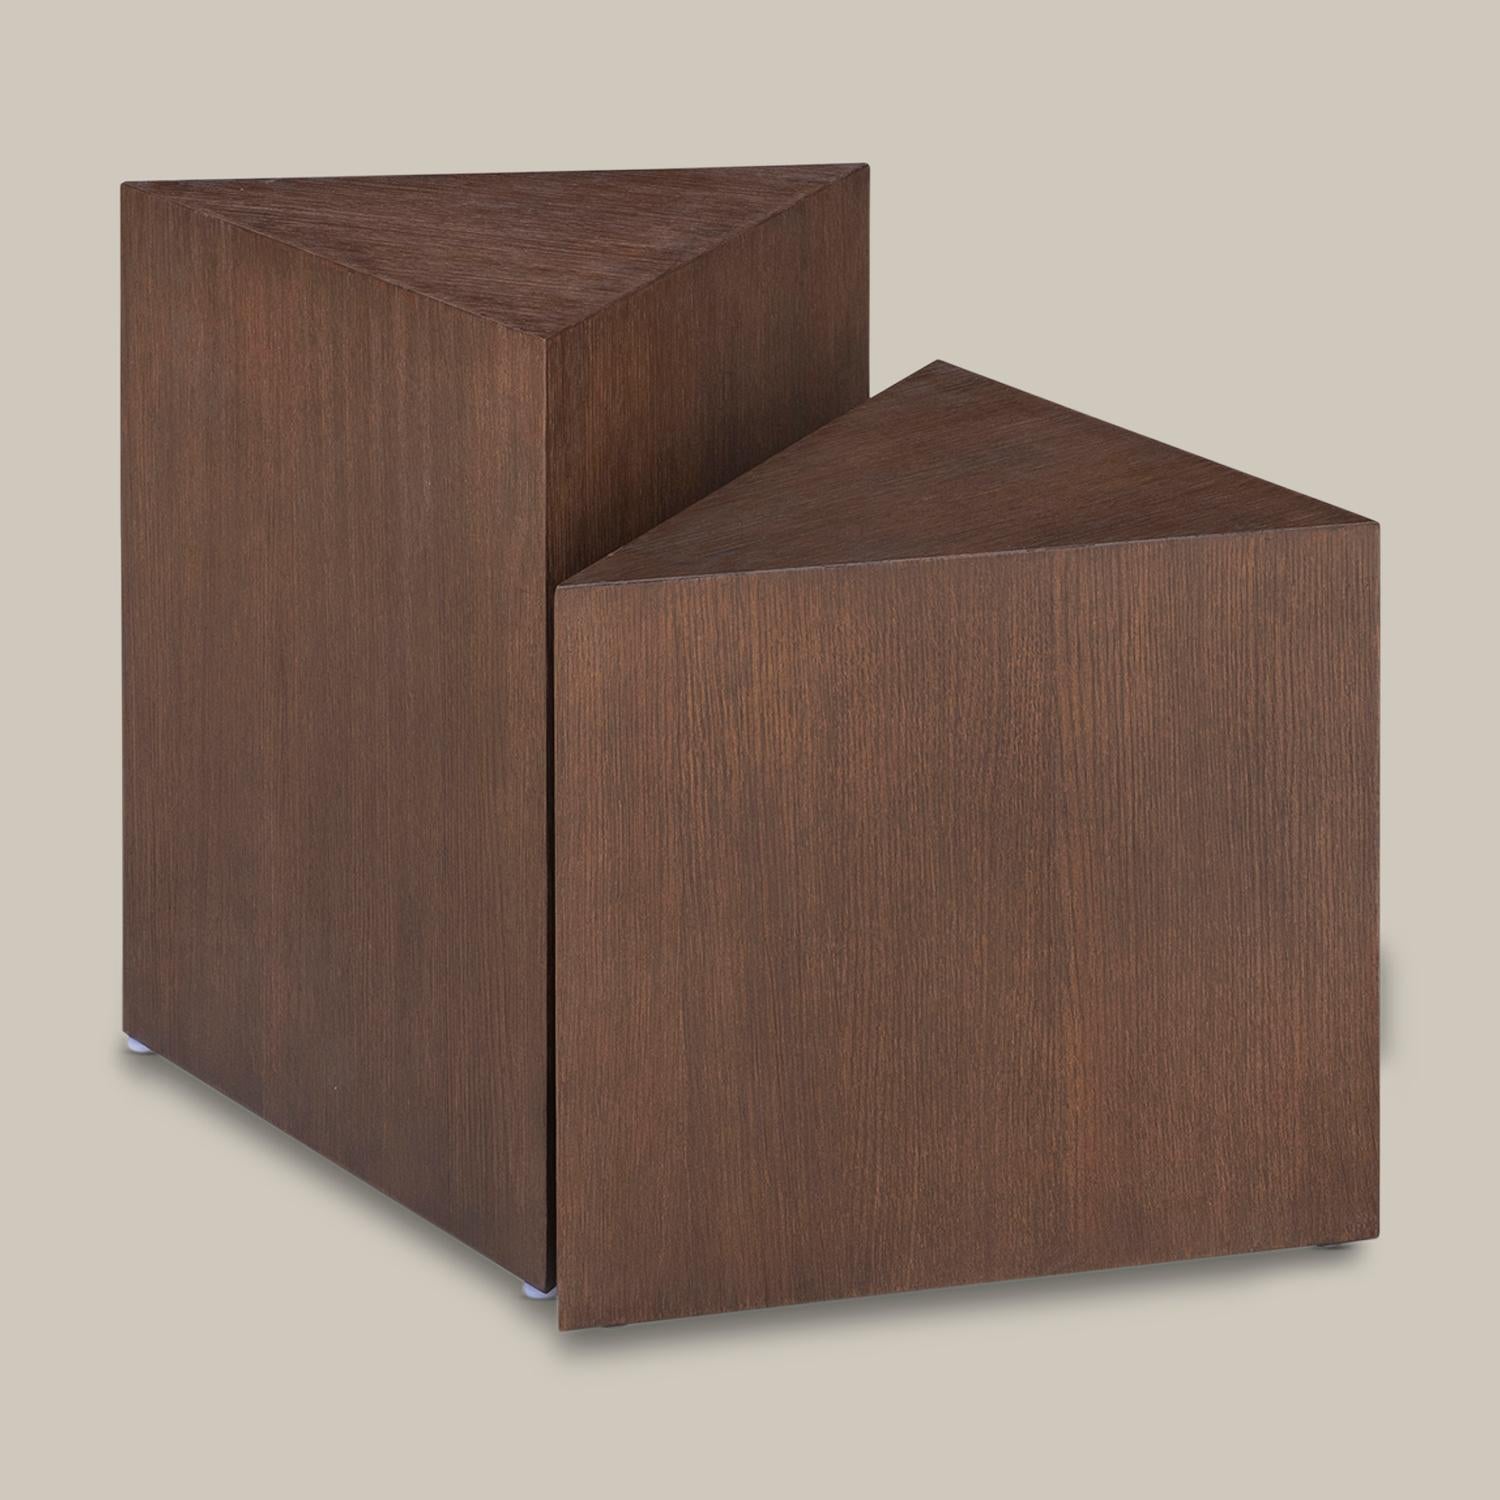 This solid wood triangular design reinterprets the tradition of sculpture as an artful side table. Handmade by artisans in Vietnam, this modern, functional piece is beautiful on its own or grouped with the Arago and Appell.

